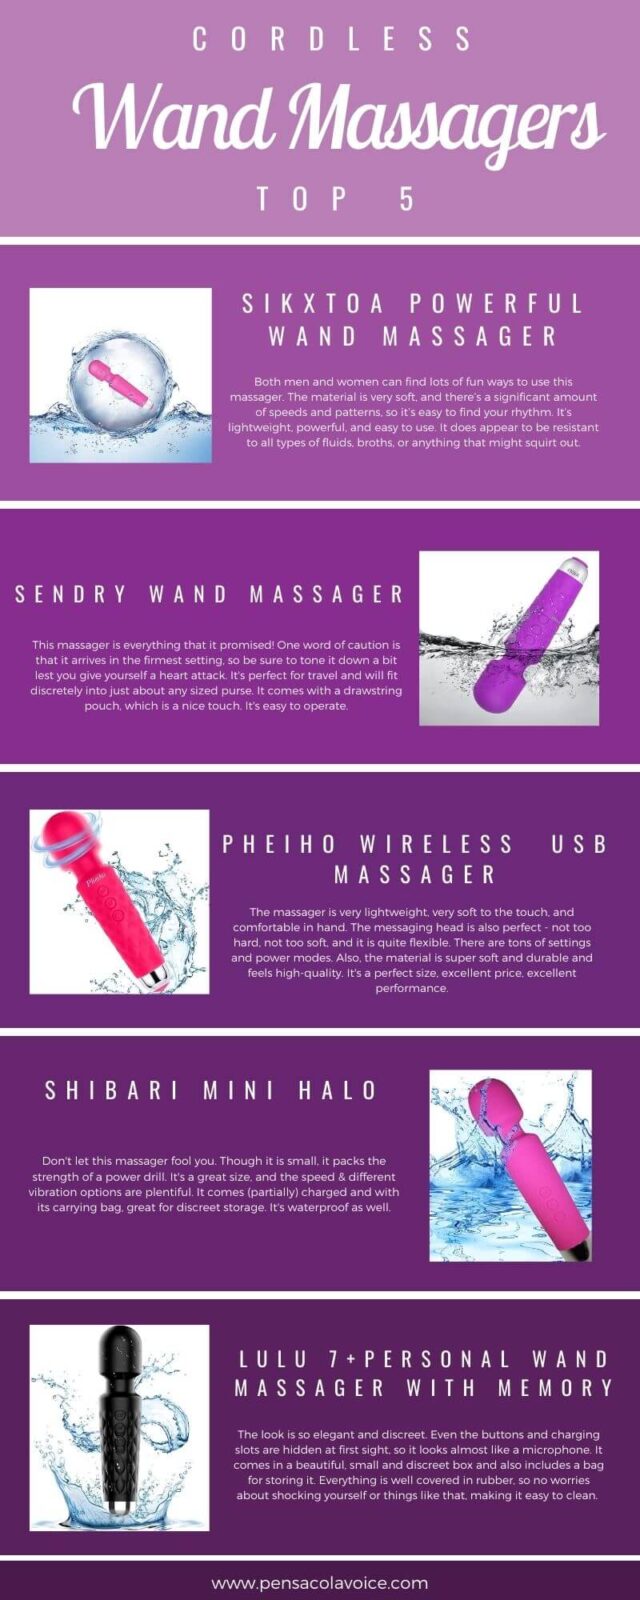 best cordless wand massagers infographic (1)